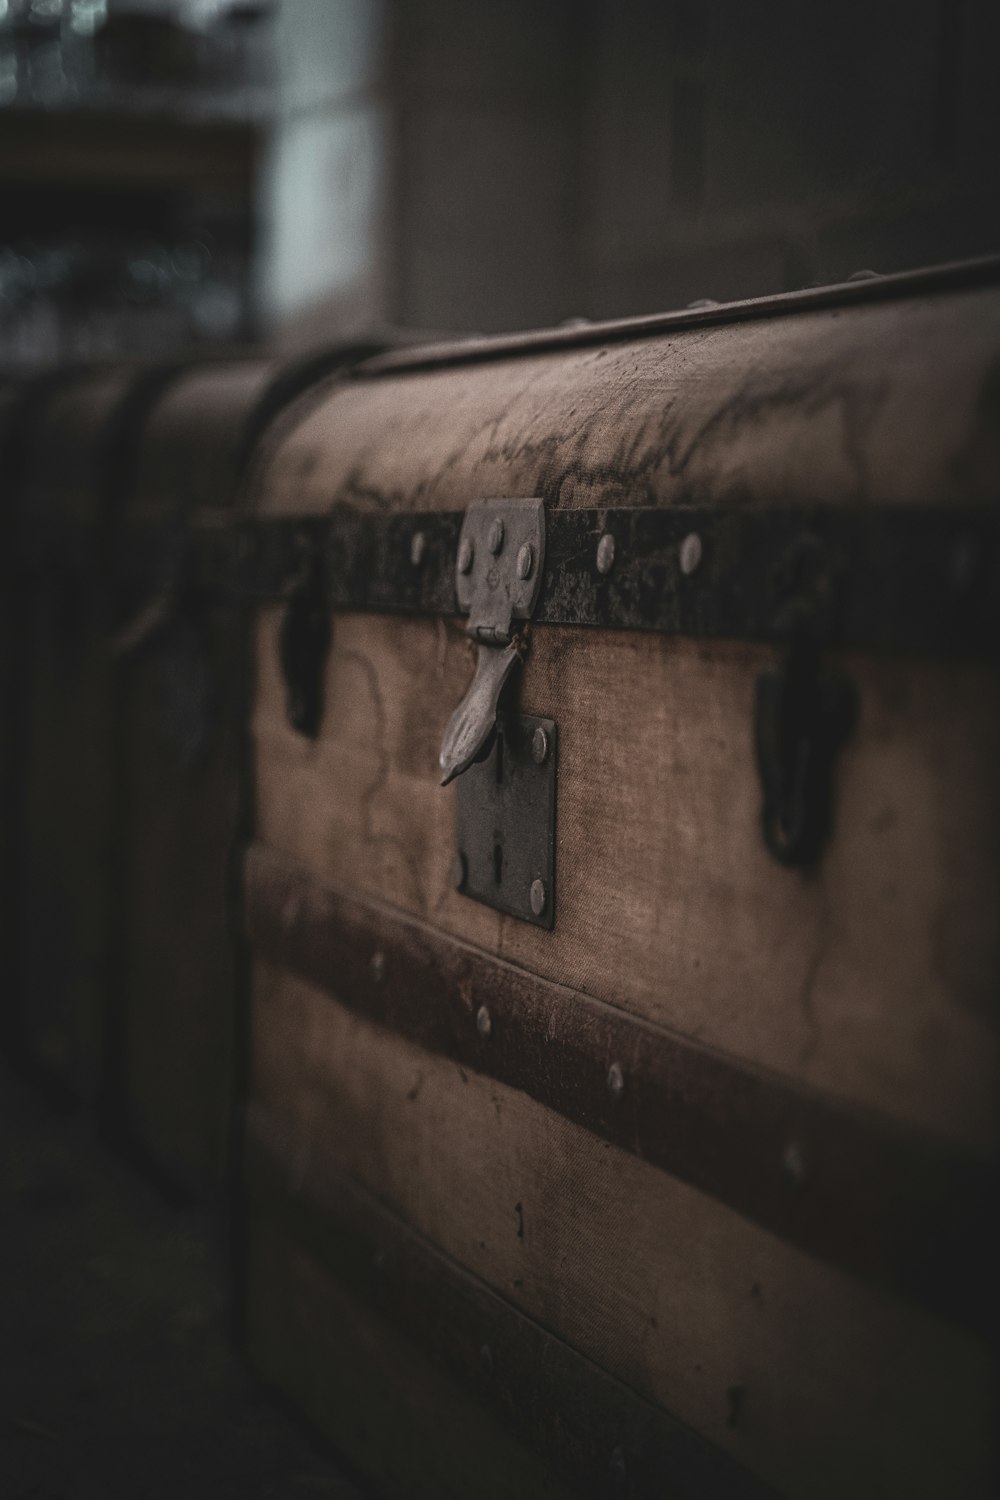 brown and black suitcase in close up photography